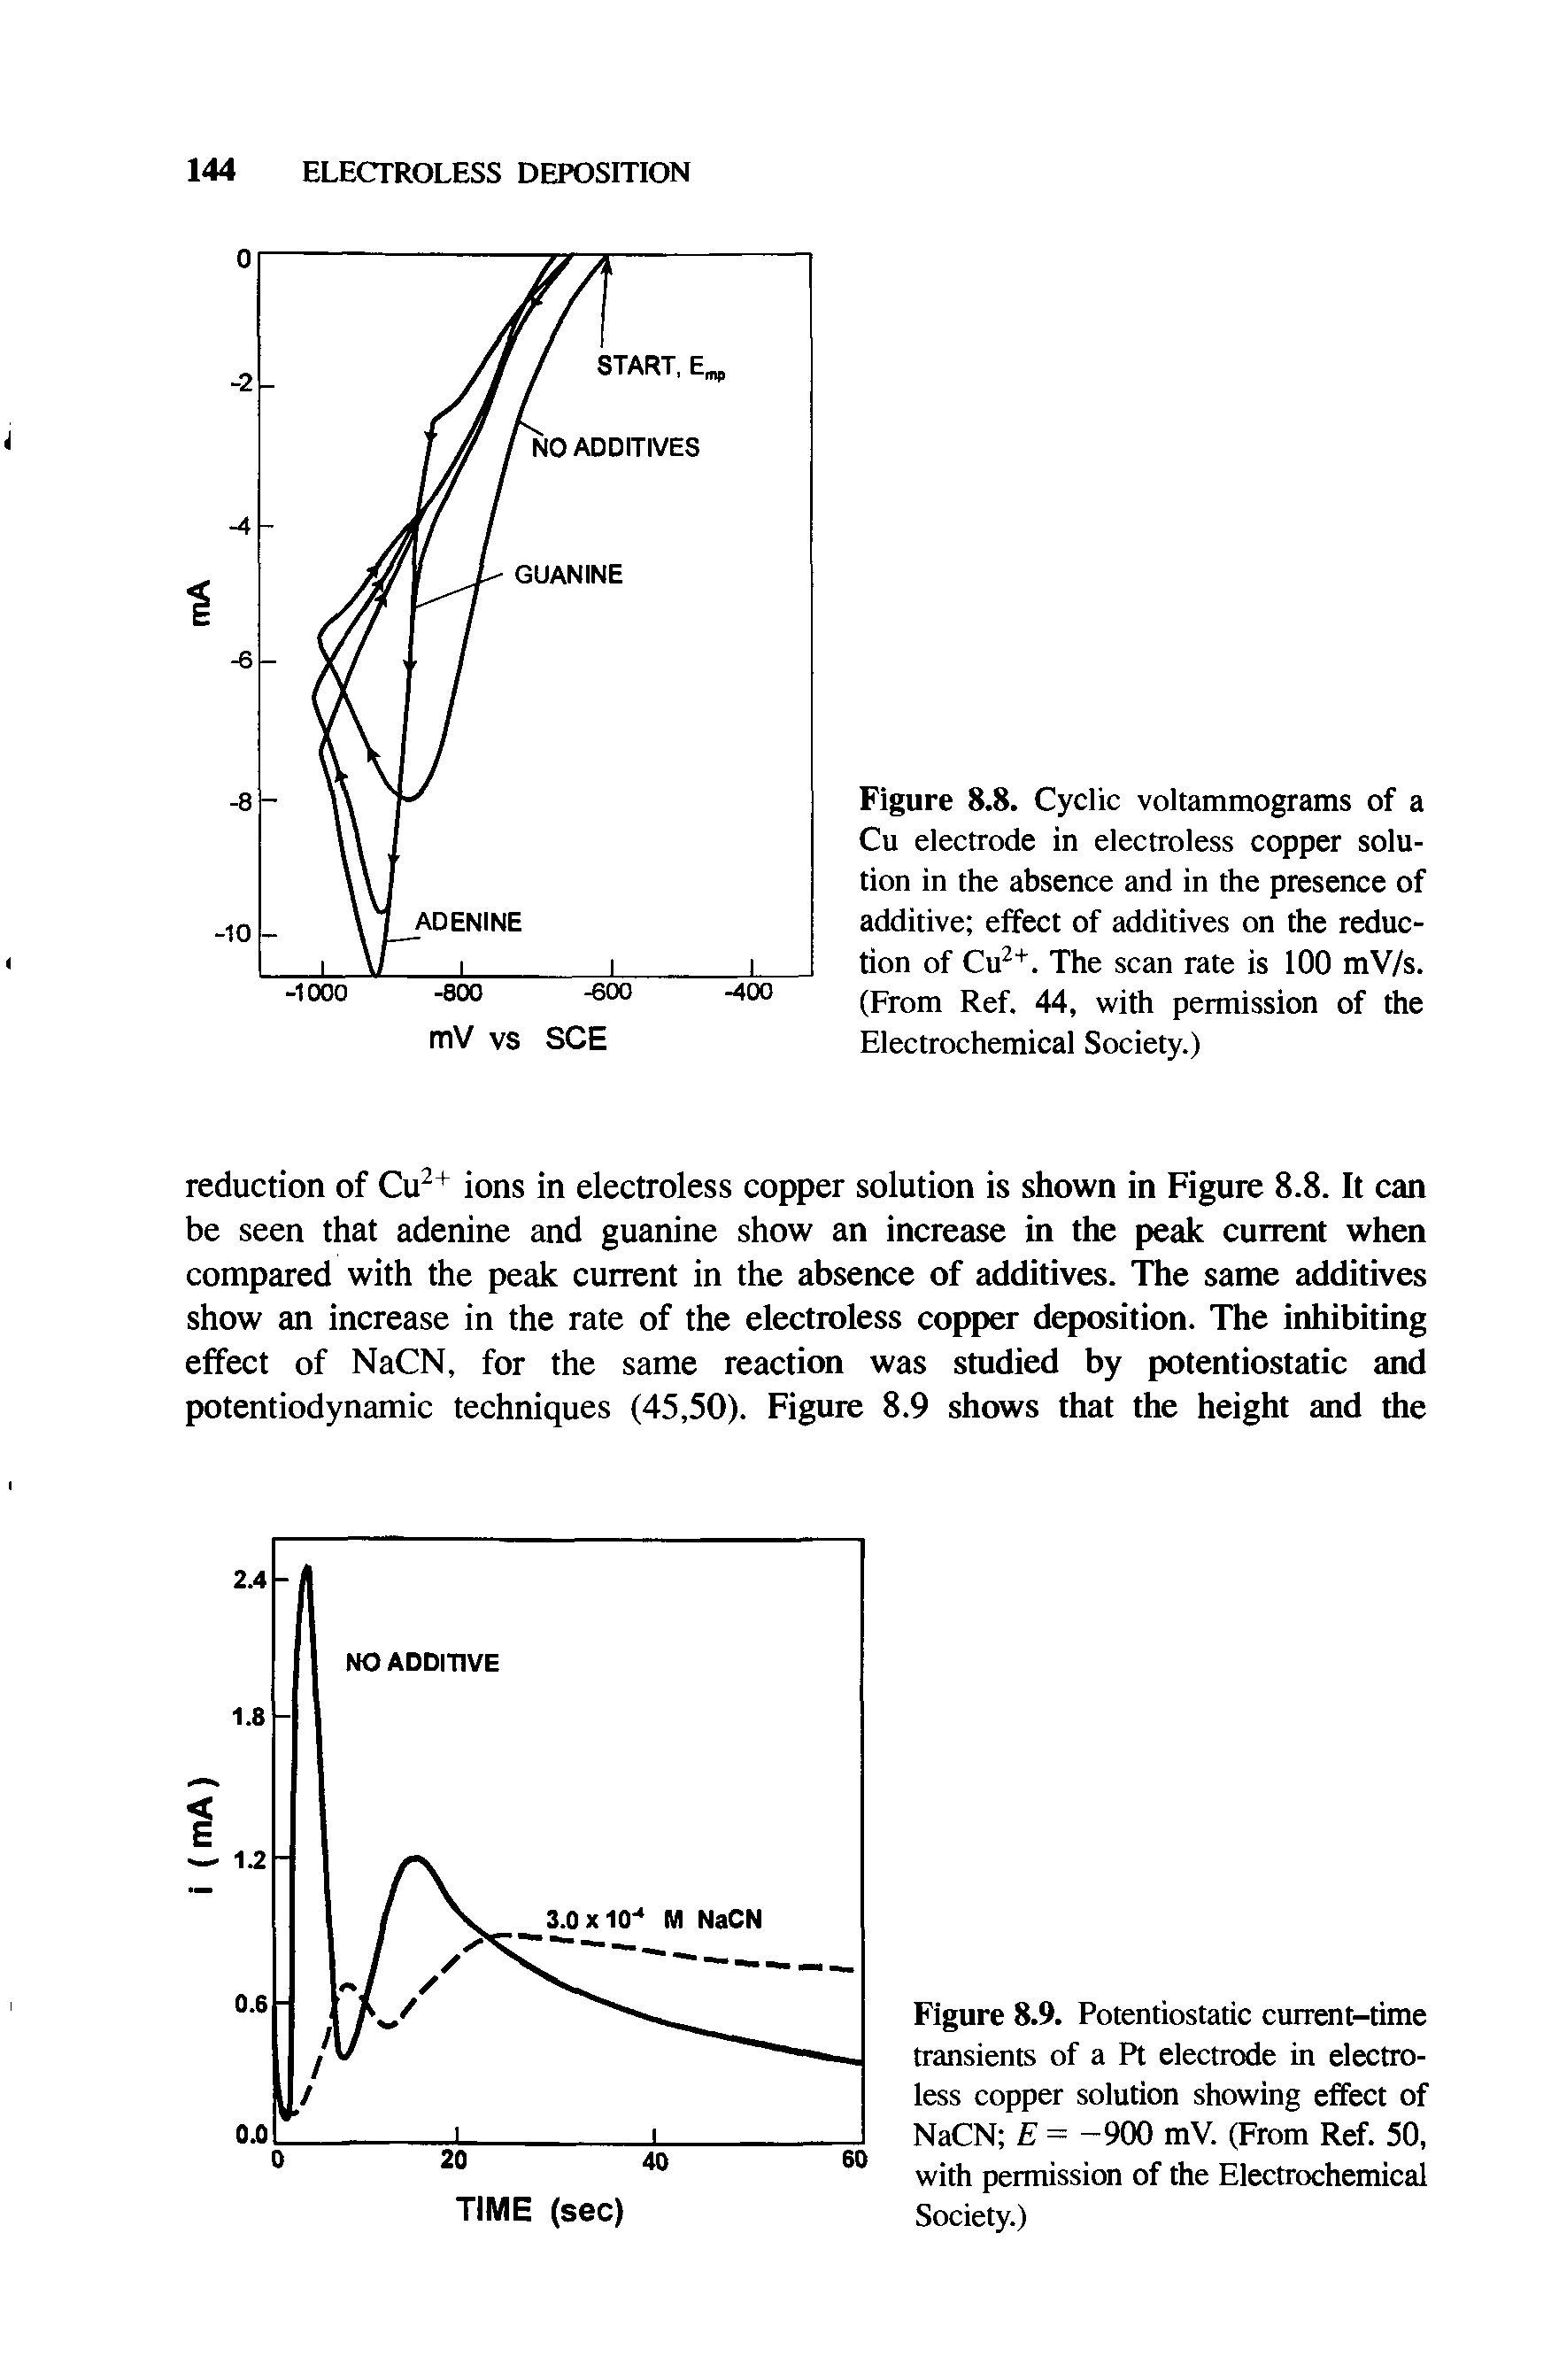 Figure 8.9. Potentiostatic current-time transients of a Pt electrode in electroless copper solution showing effect of NaCN E = -900 mV. (From Ref. 50, with permission of the Electrochemical Society.)...